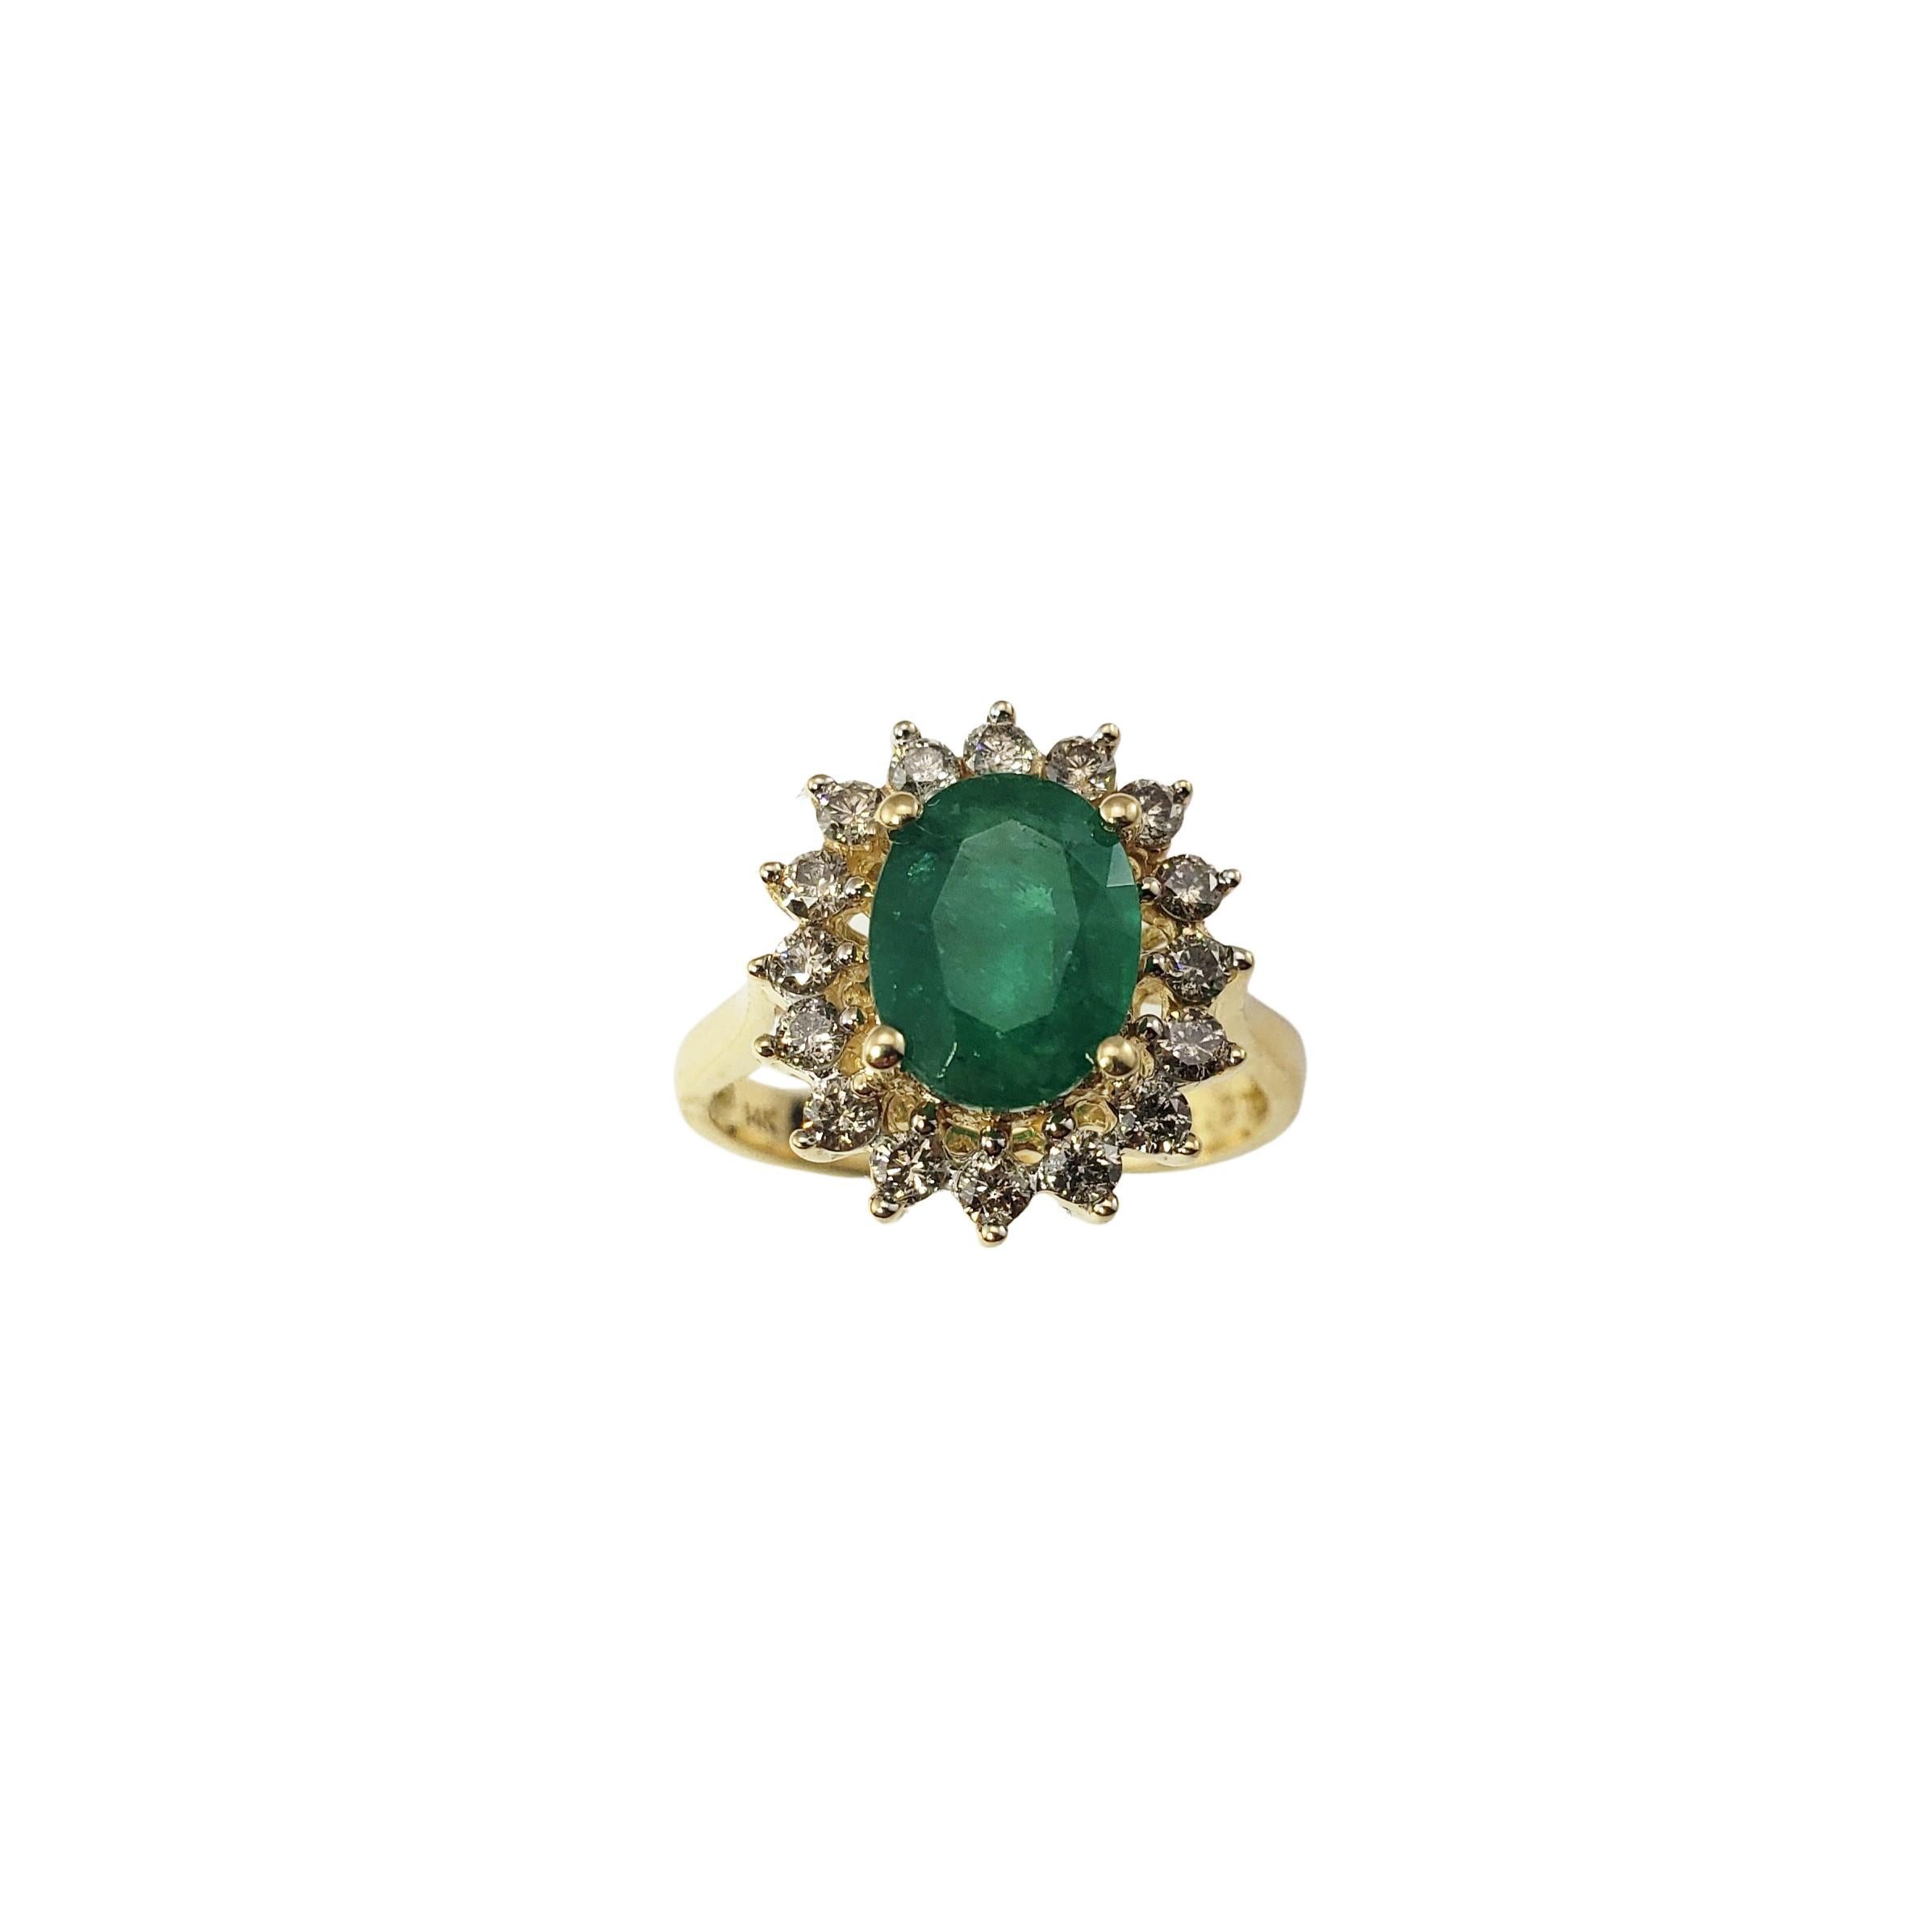 14 Karat Yellow Gold Natural Emerald and Diamond Ring Size 7 -

This stunning ring features one oval emerald (9 mm x 7 mm) surrounded by 16 round brilliant cut diamonds set in classic 14K yellow gold.  Top of ring measures 15 mm x 13 mm.  Shank:  3